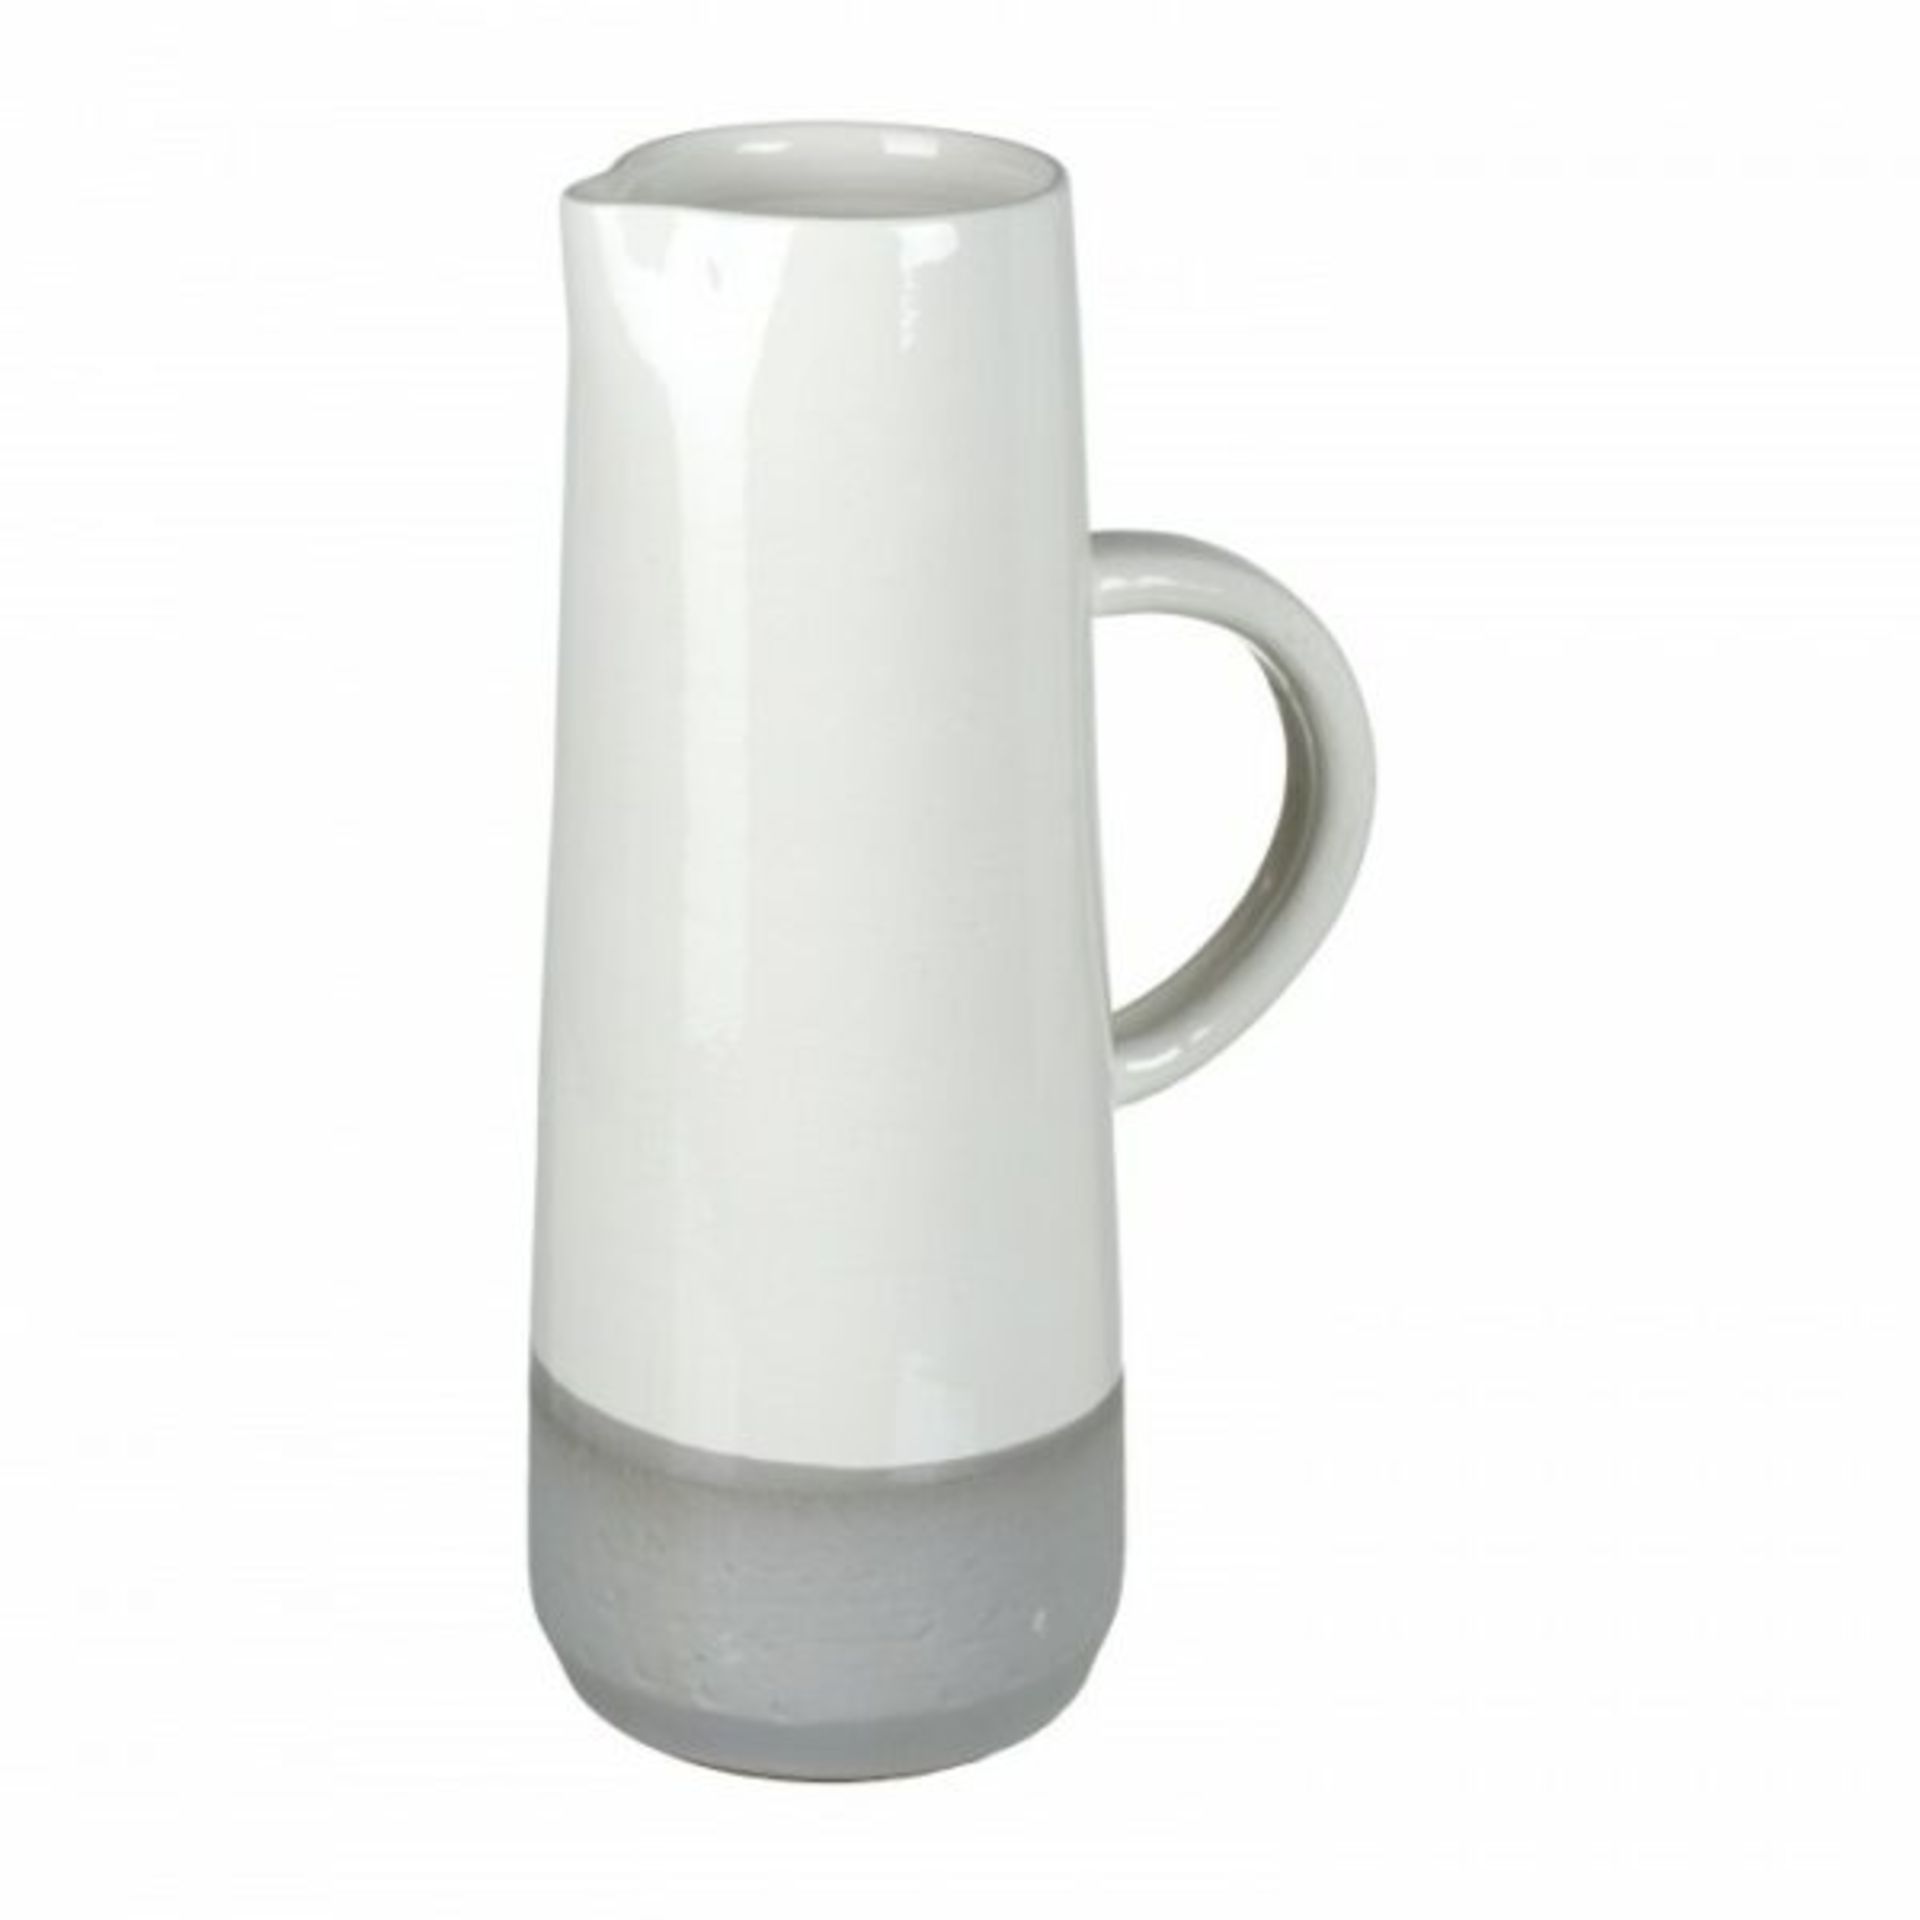 Malmsbury Pitcher white and Grey 150x380mmh Brand New Parlane Accessories We take our product